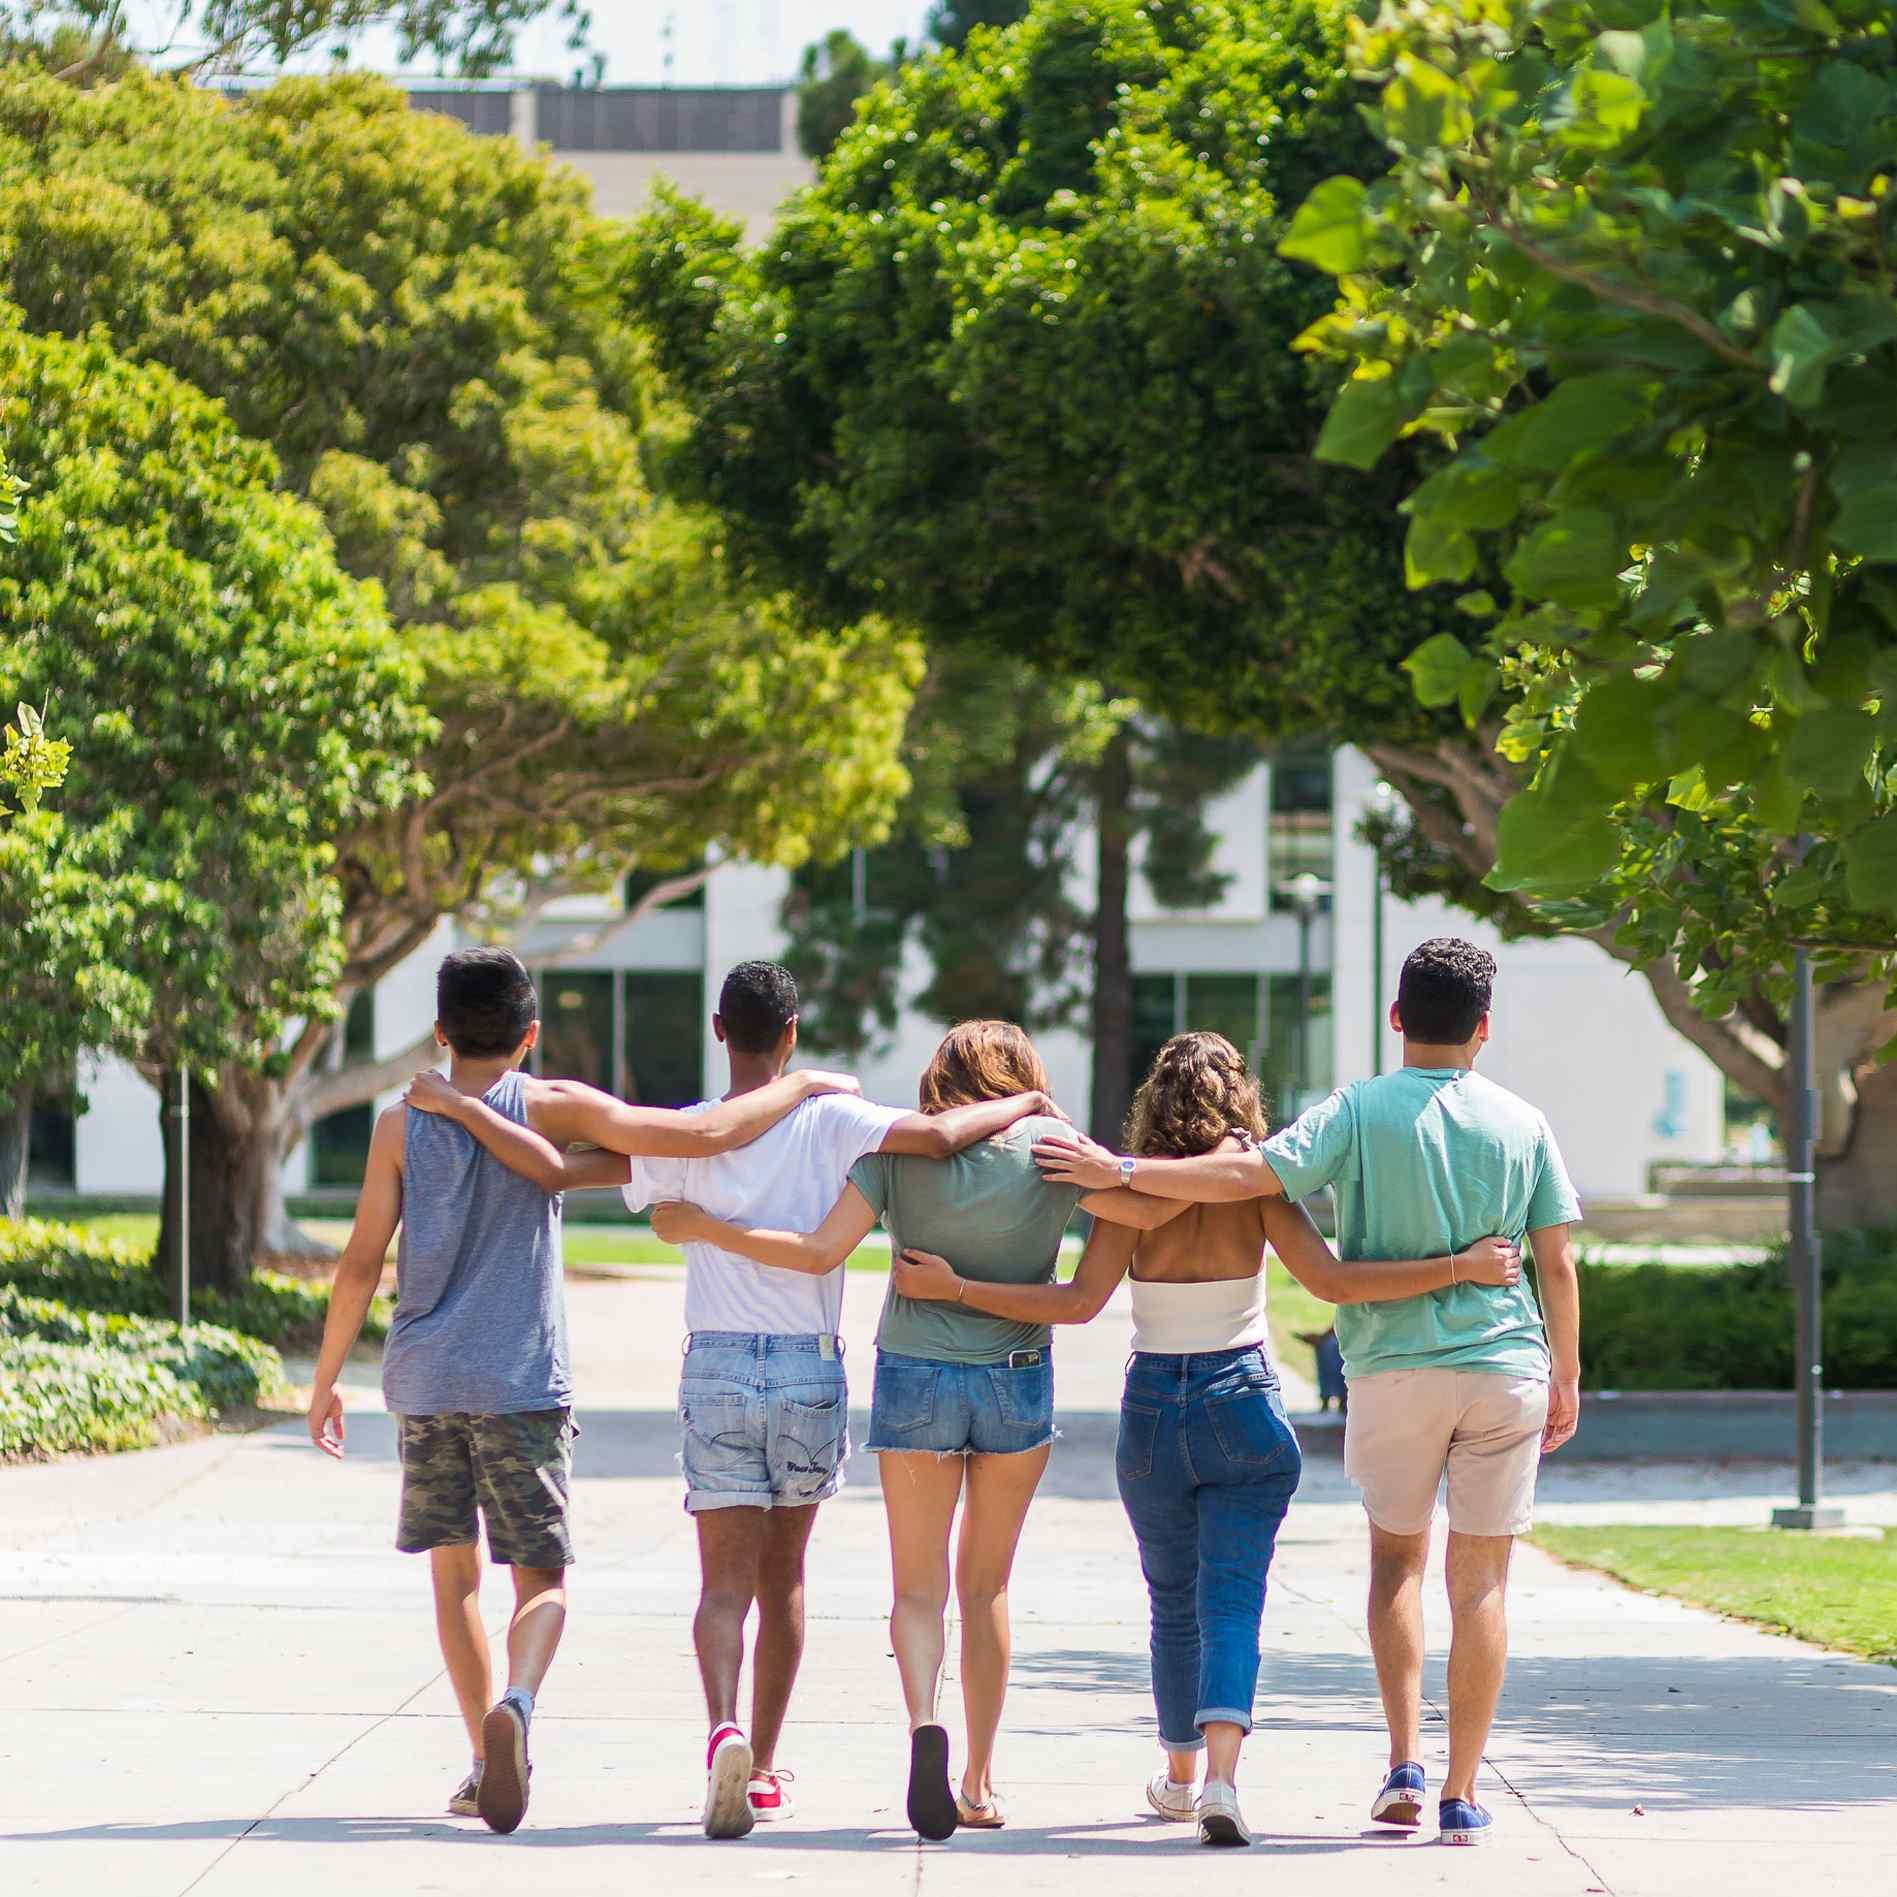 photo of UCSB students walking together for communities